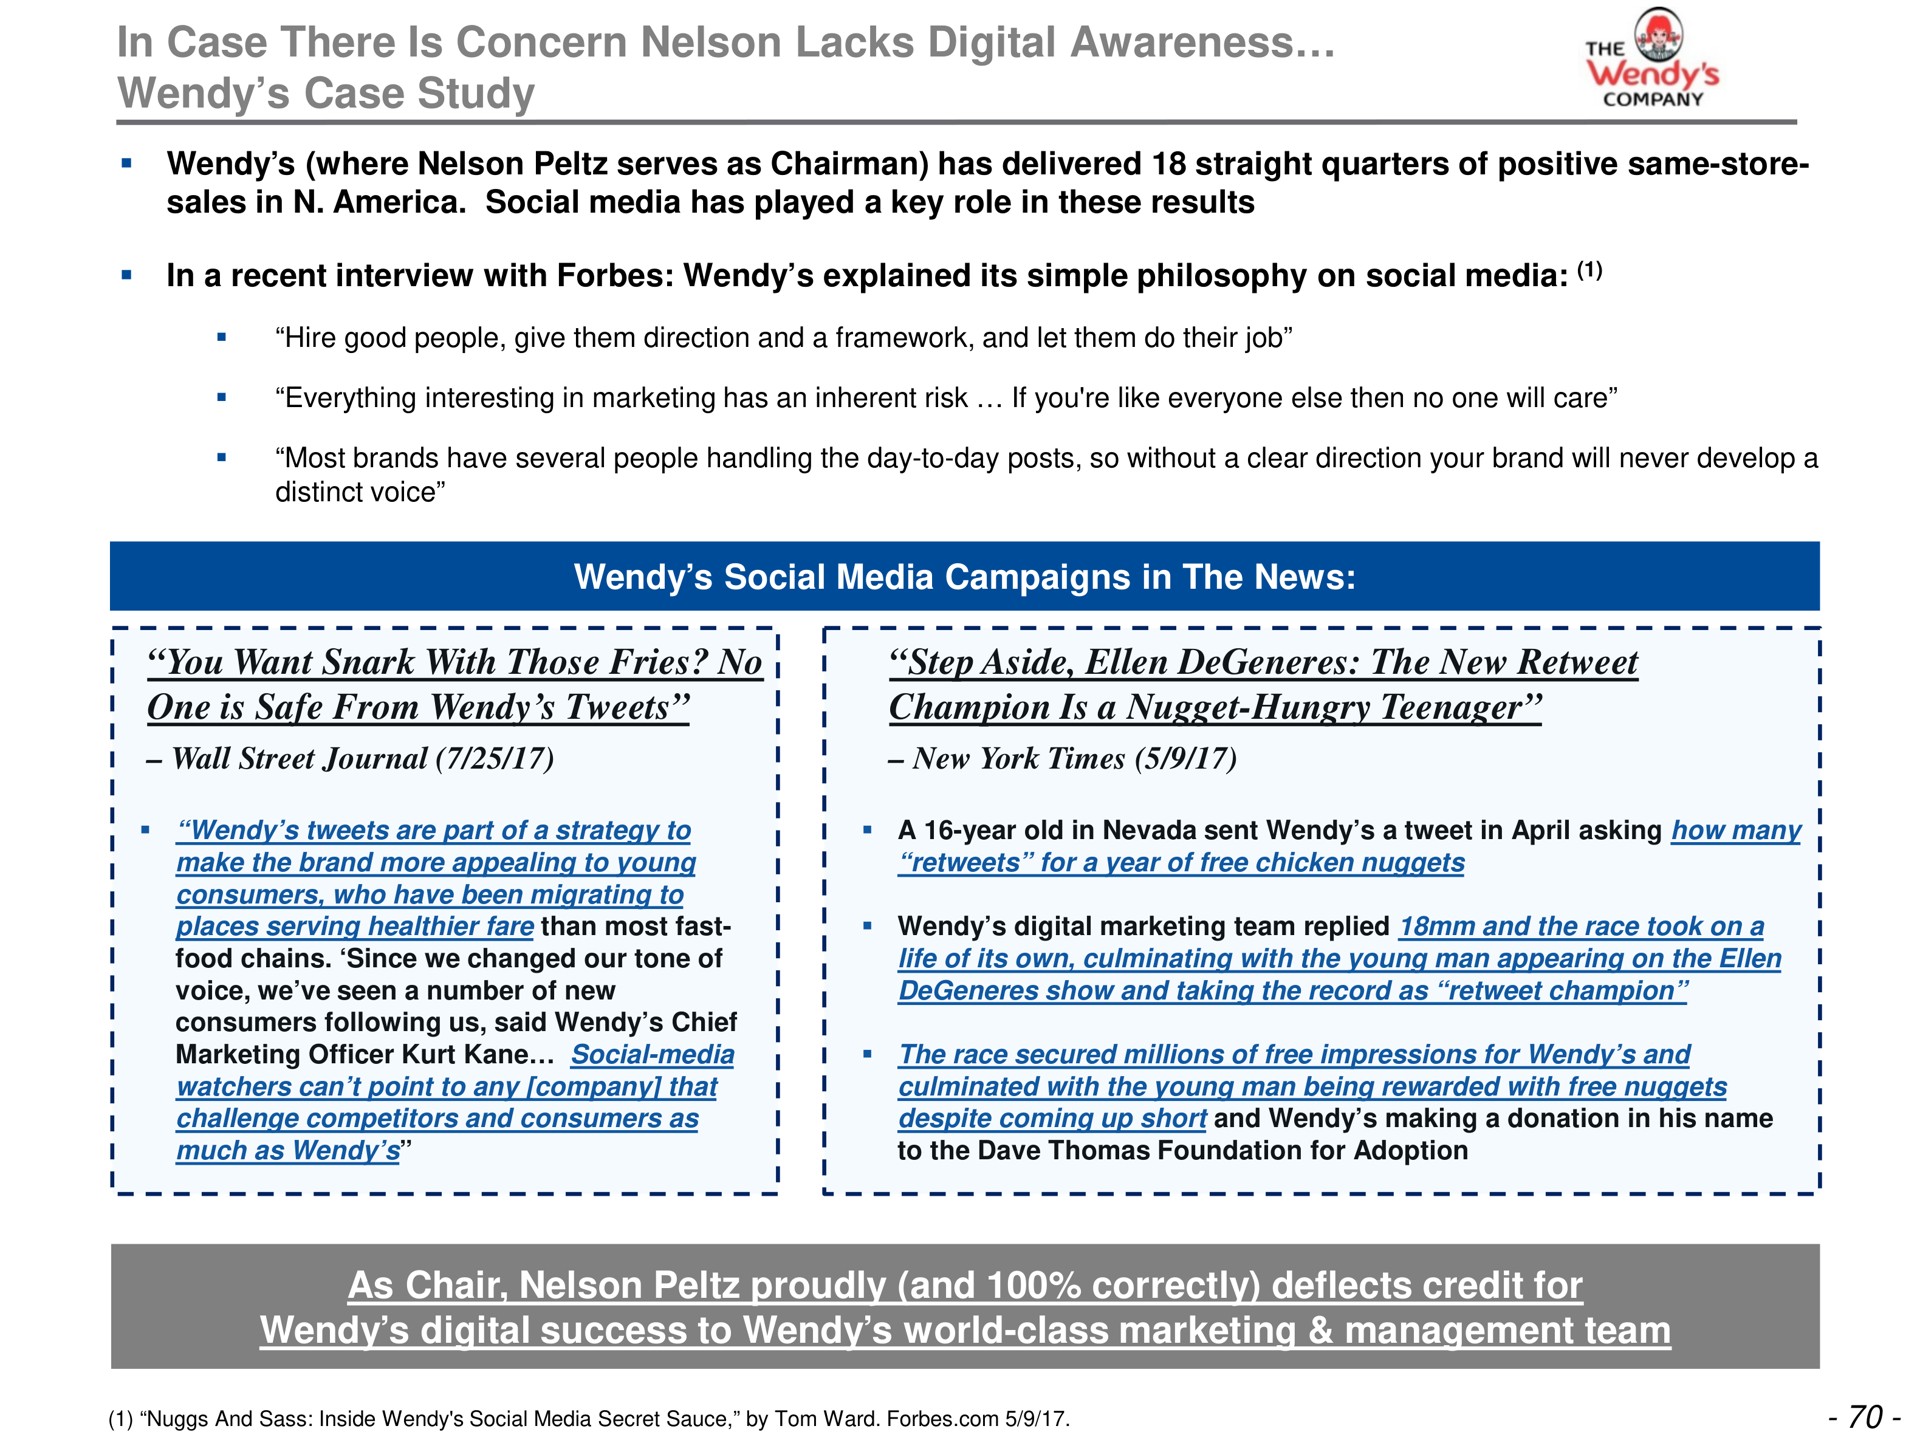 in case there is concern nelson lacks digital awareness case study ree company | Trian Partners